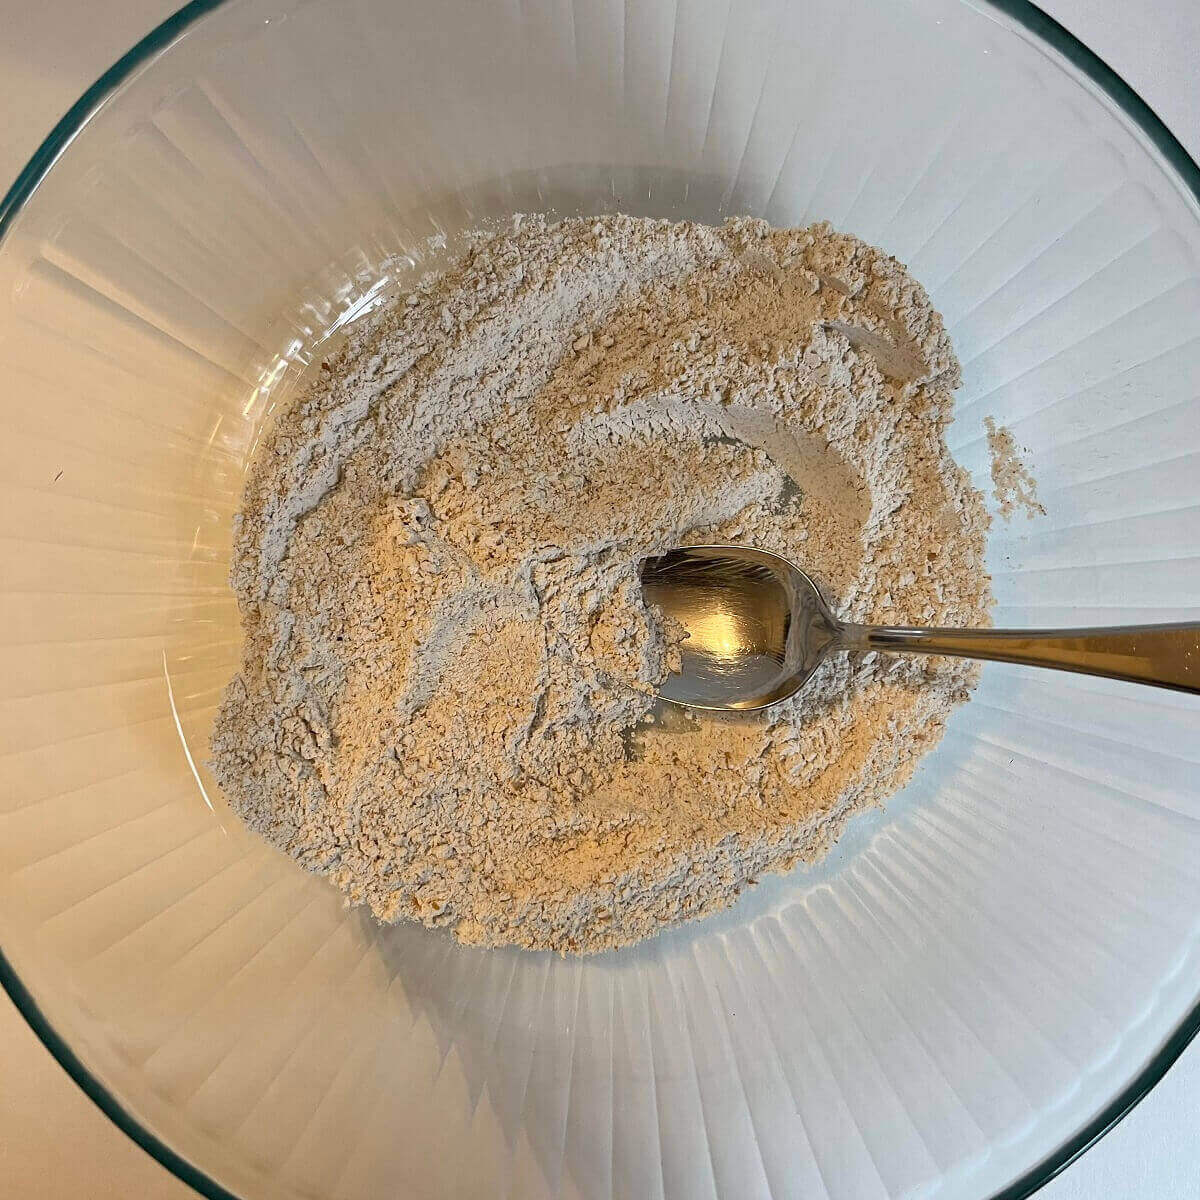 Dry ingredients for cookies in a glass mixing bowl.